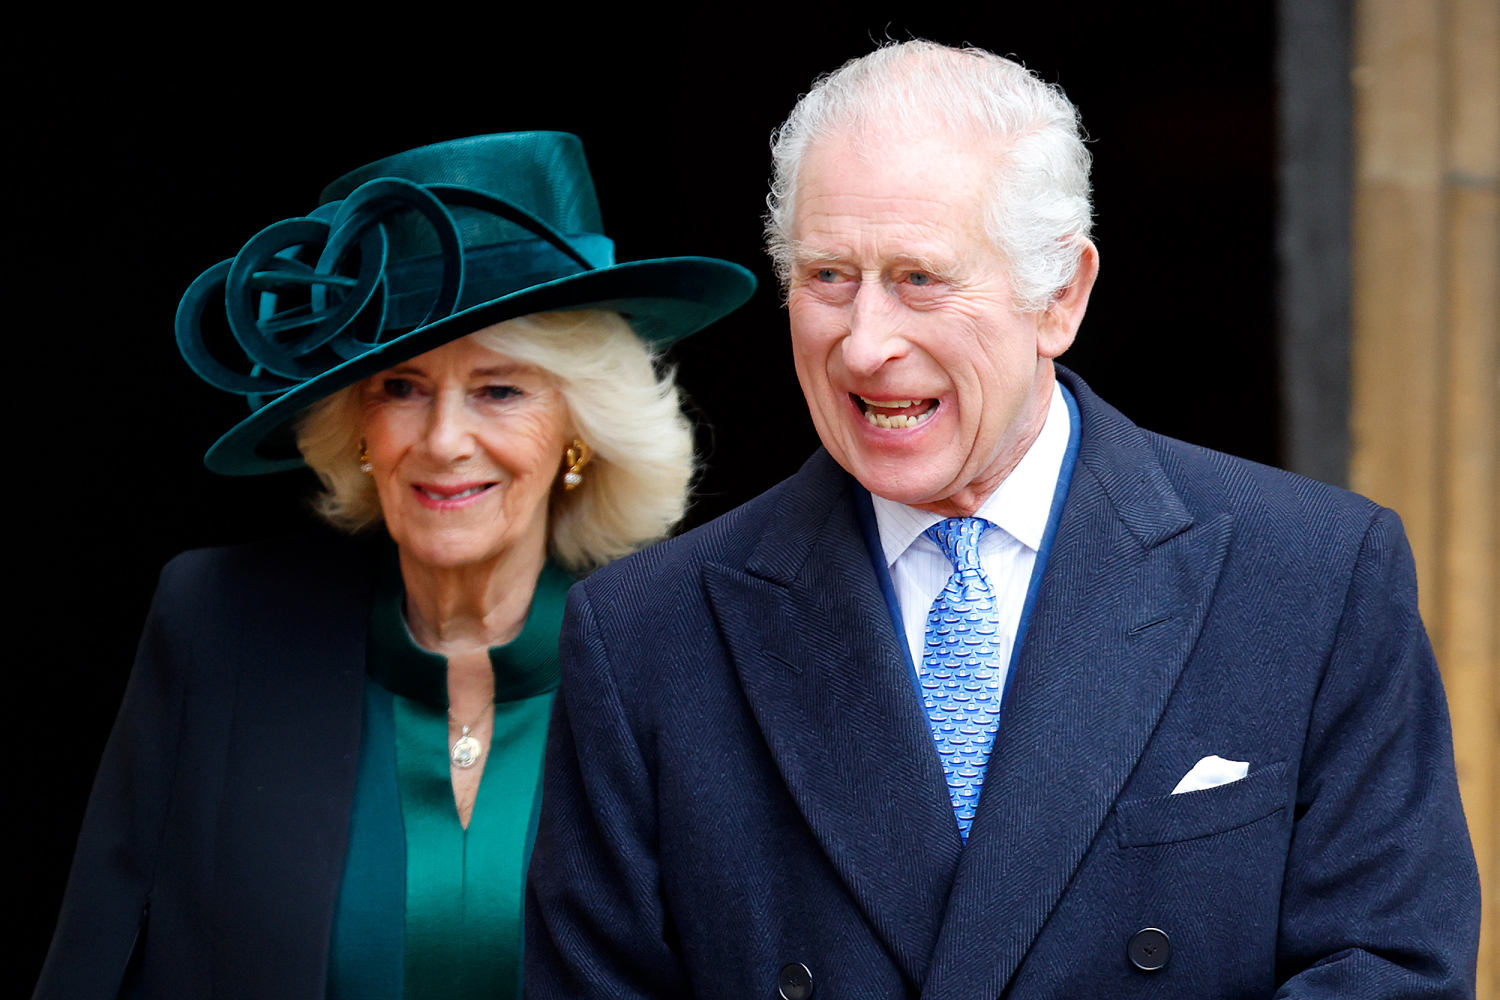 King Charles to resume public duties after 'progress' in cancer treatment